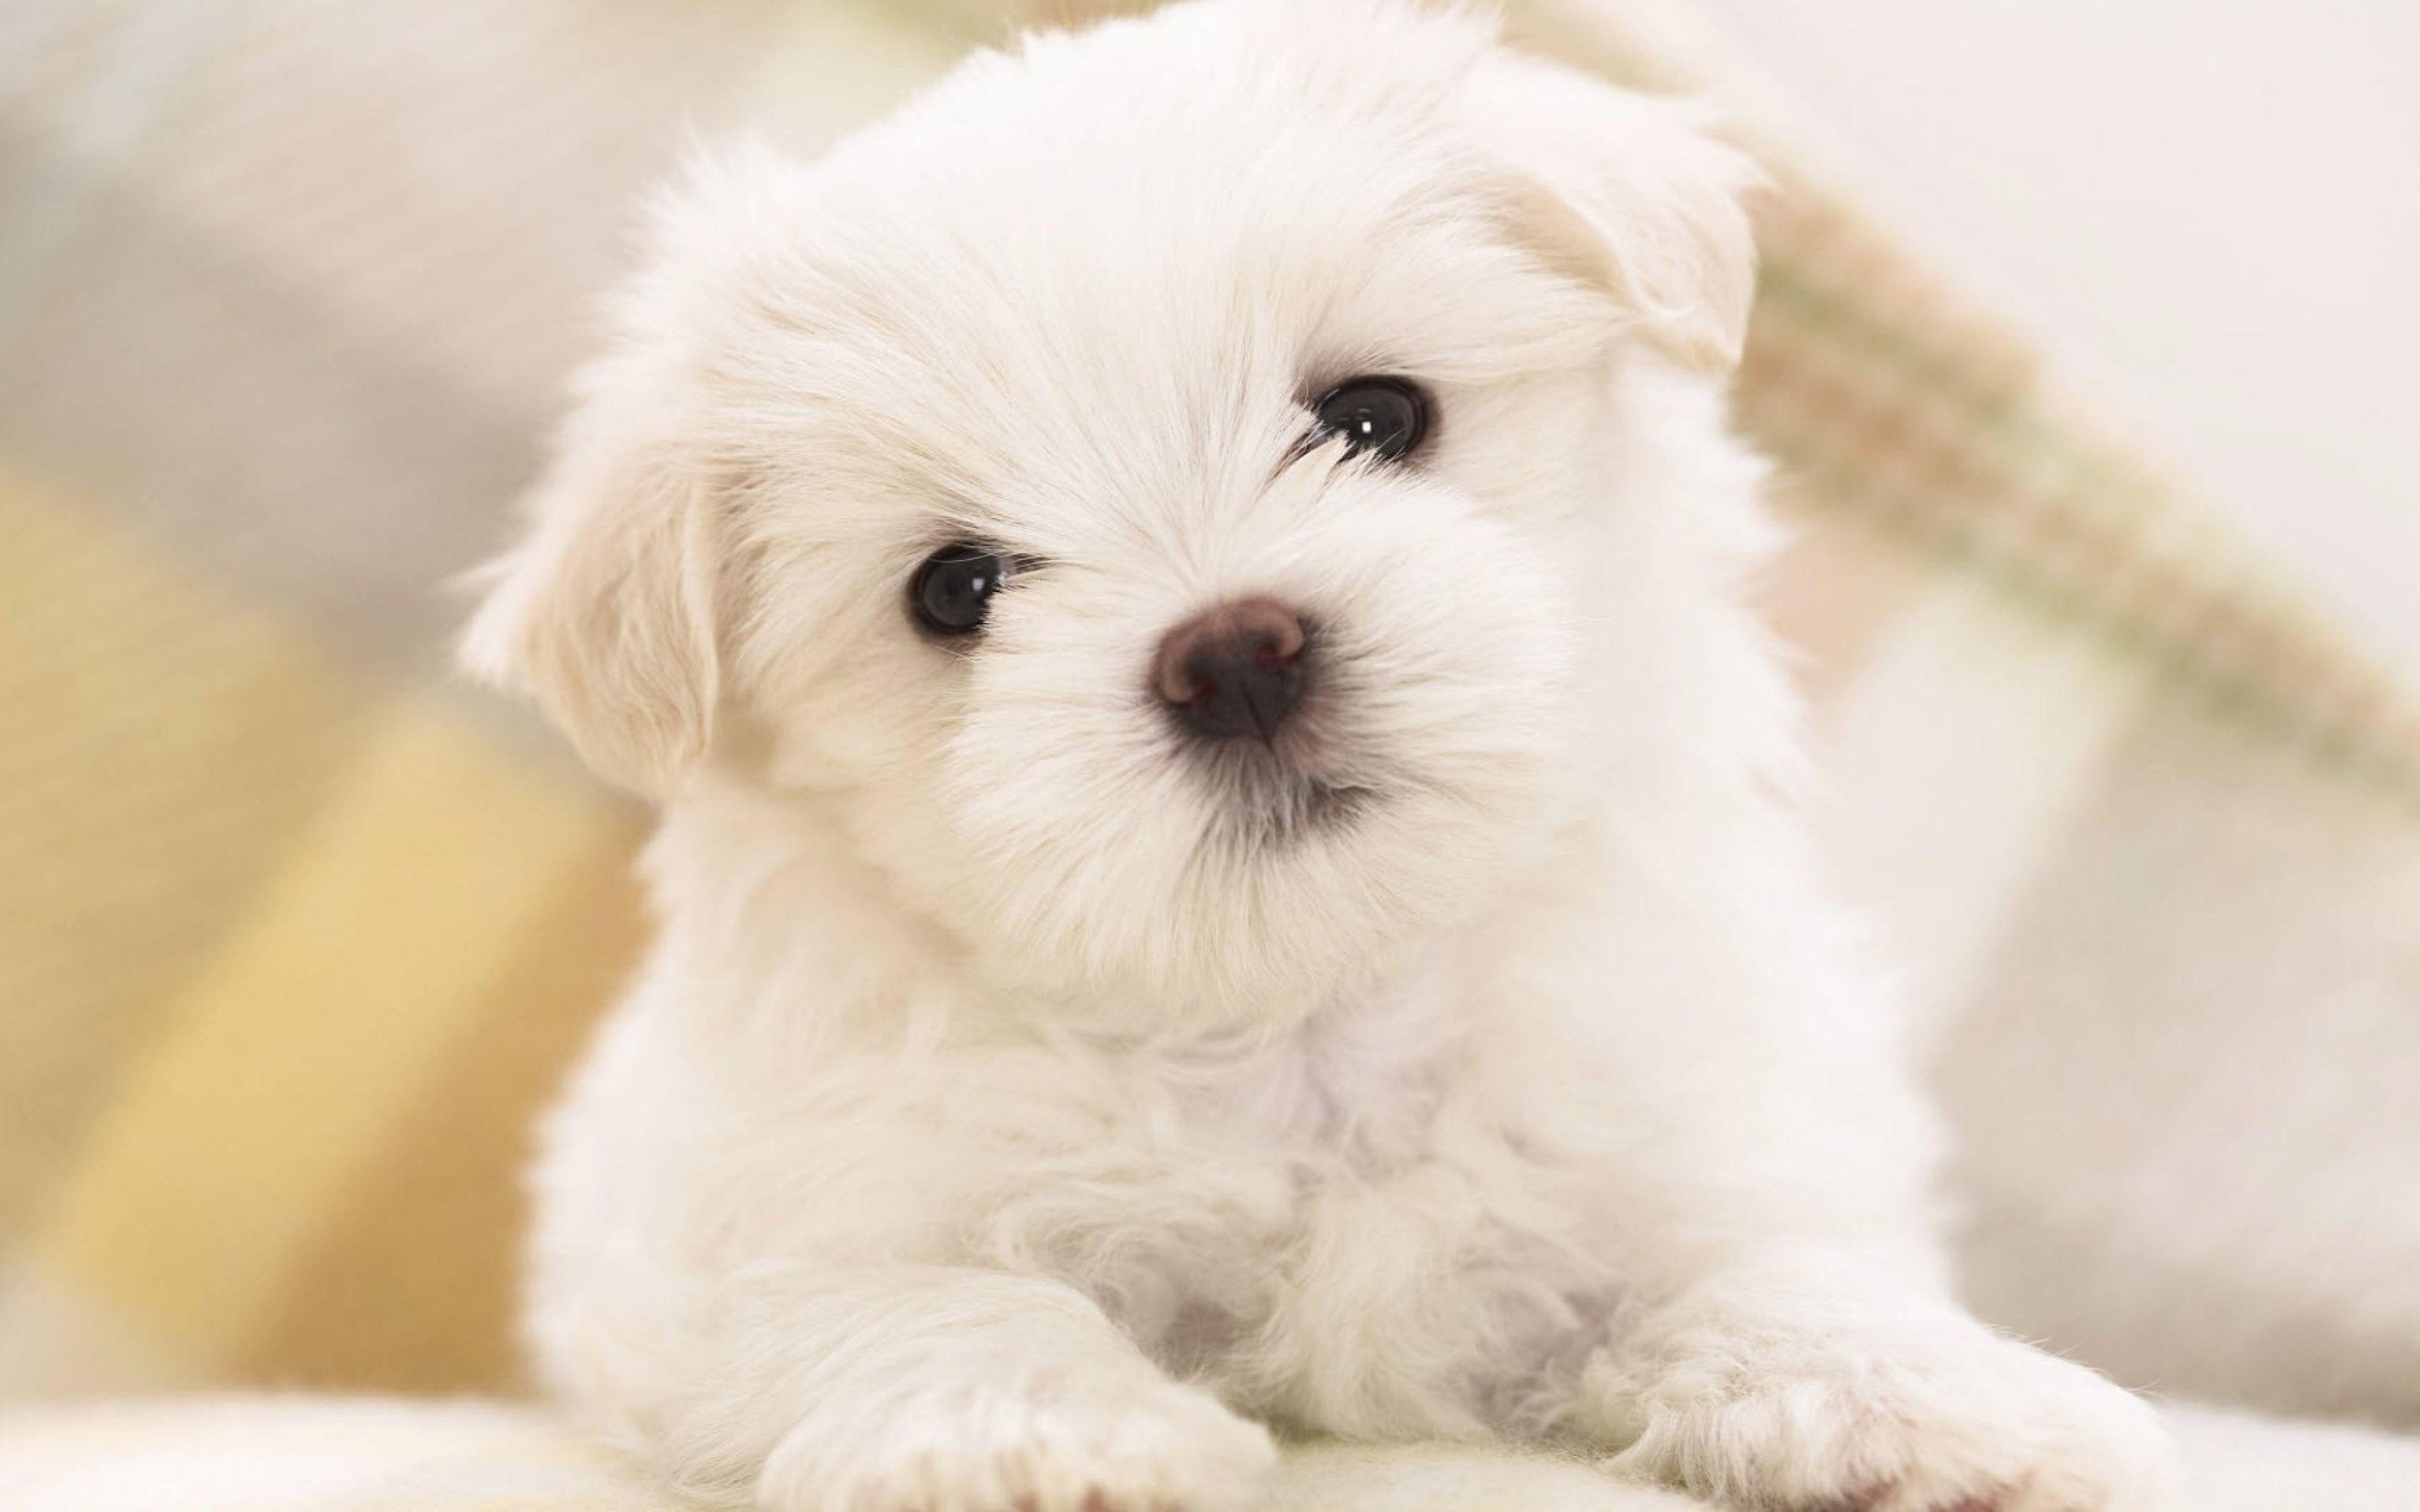 Download wallpaper Bichon Frise, French dog breed, white small dog